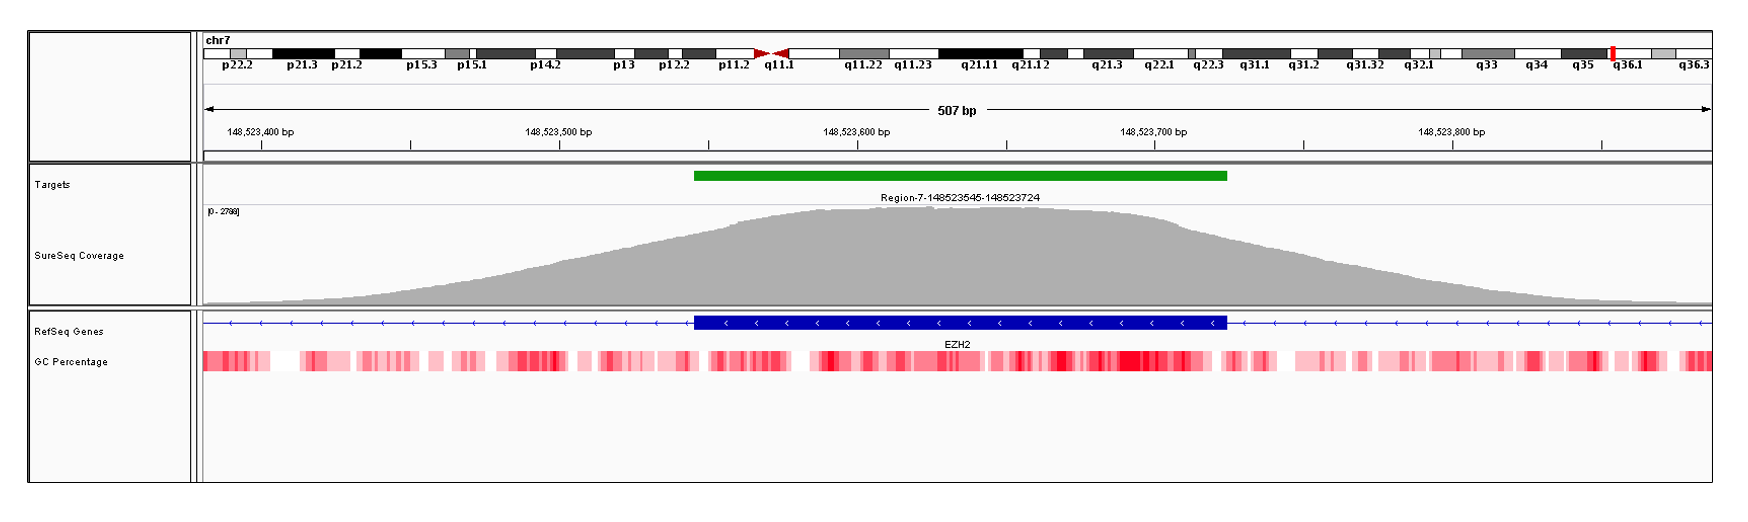 EZH2 Exon 8 (hg19 chr7:148523561-148523724). Depth of coverage per base (grey). Targeted region (green). Gene coding region as defined by RefSeq (blue). GC percentage (red). Image